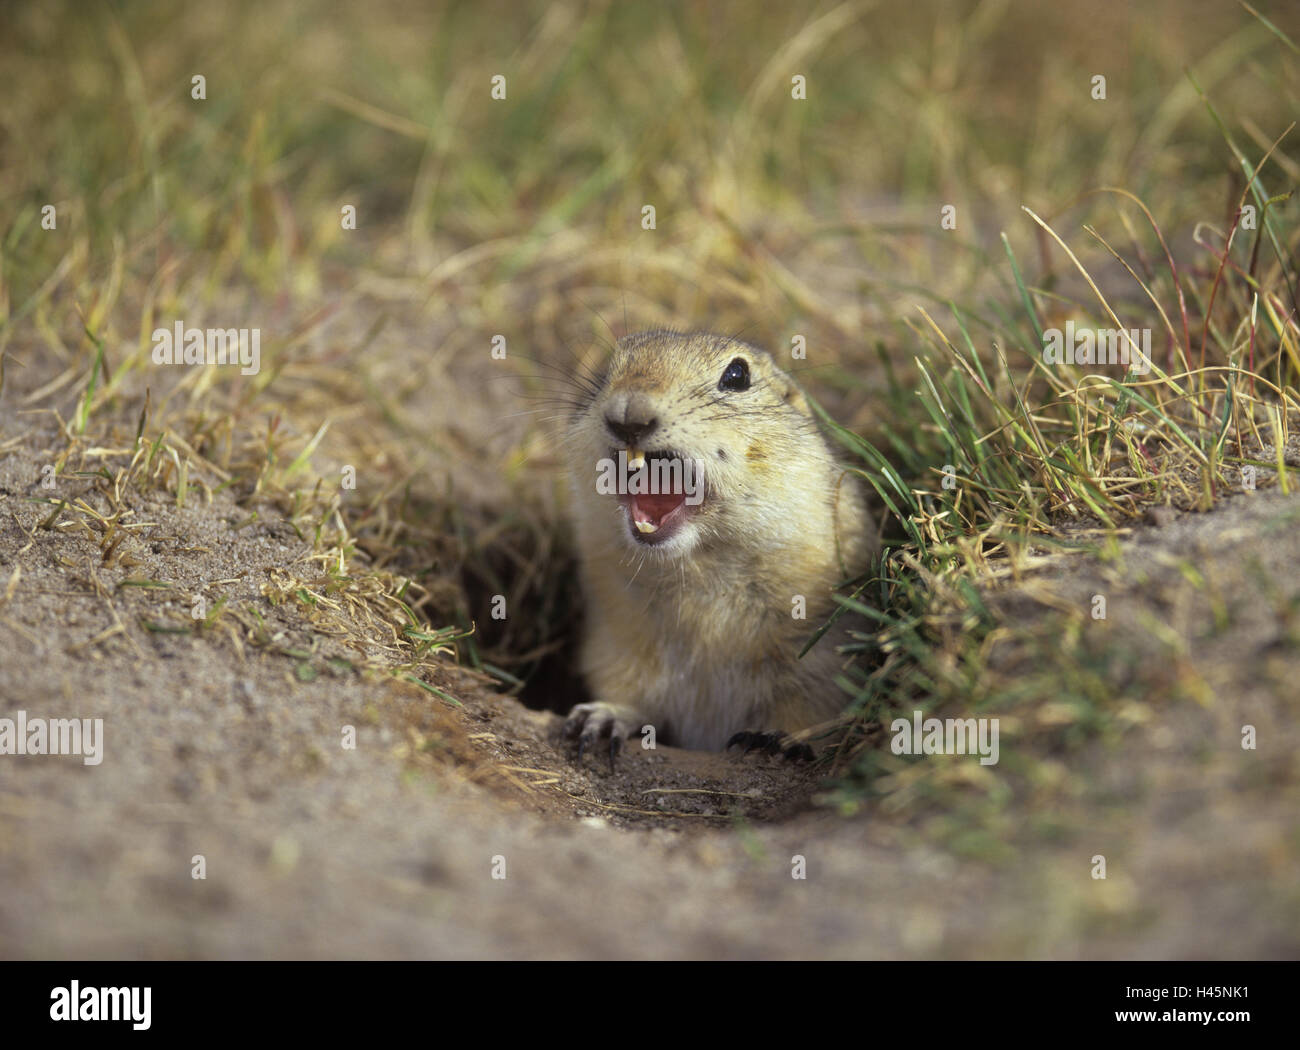 Hole in the ground, Richardson-Ziesel, warning cry, mammal, animal, wild animal, Ziesel, rodent kind, rodent, gopher, call, warning, Lautgebung, watchfully, carefully, North America, Canada, Stock Photo